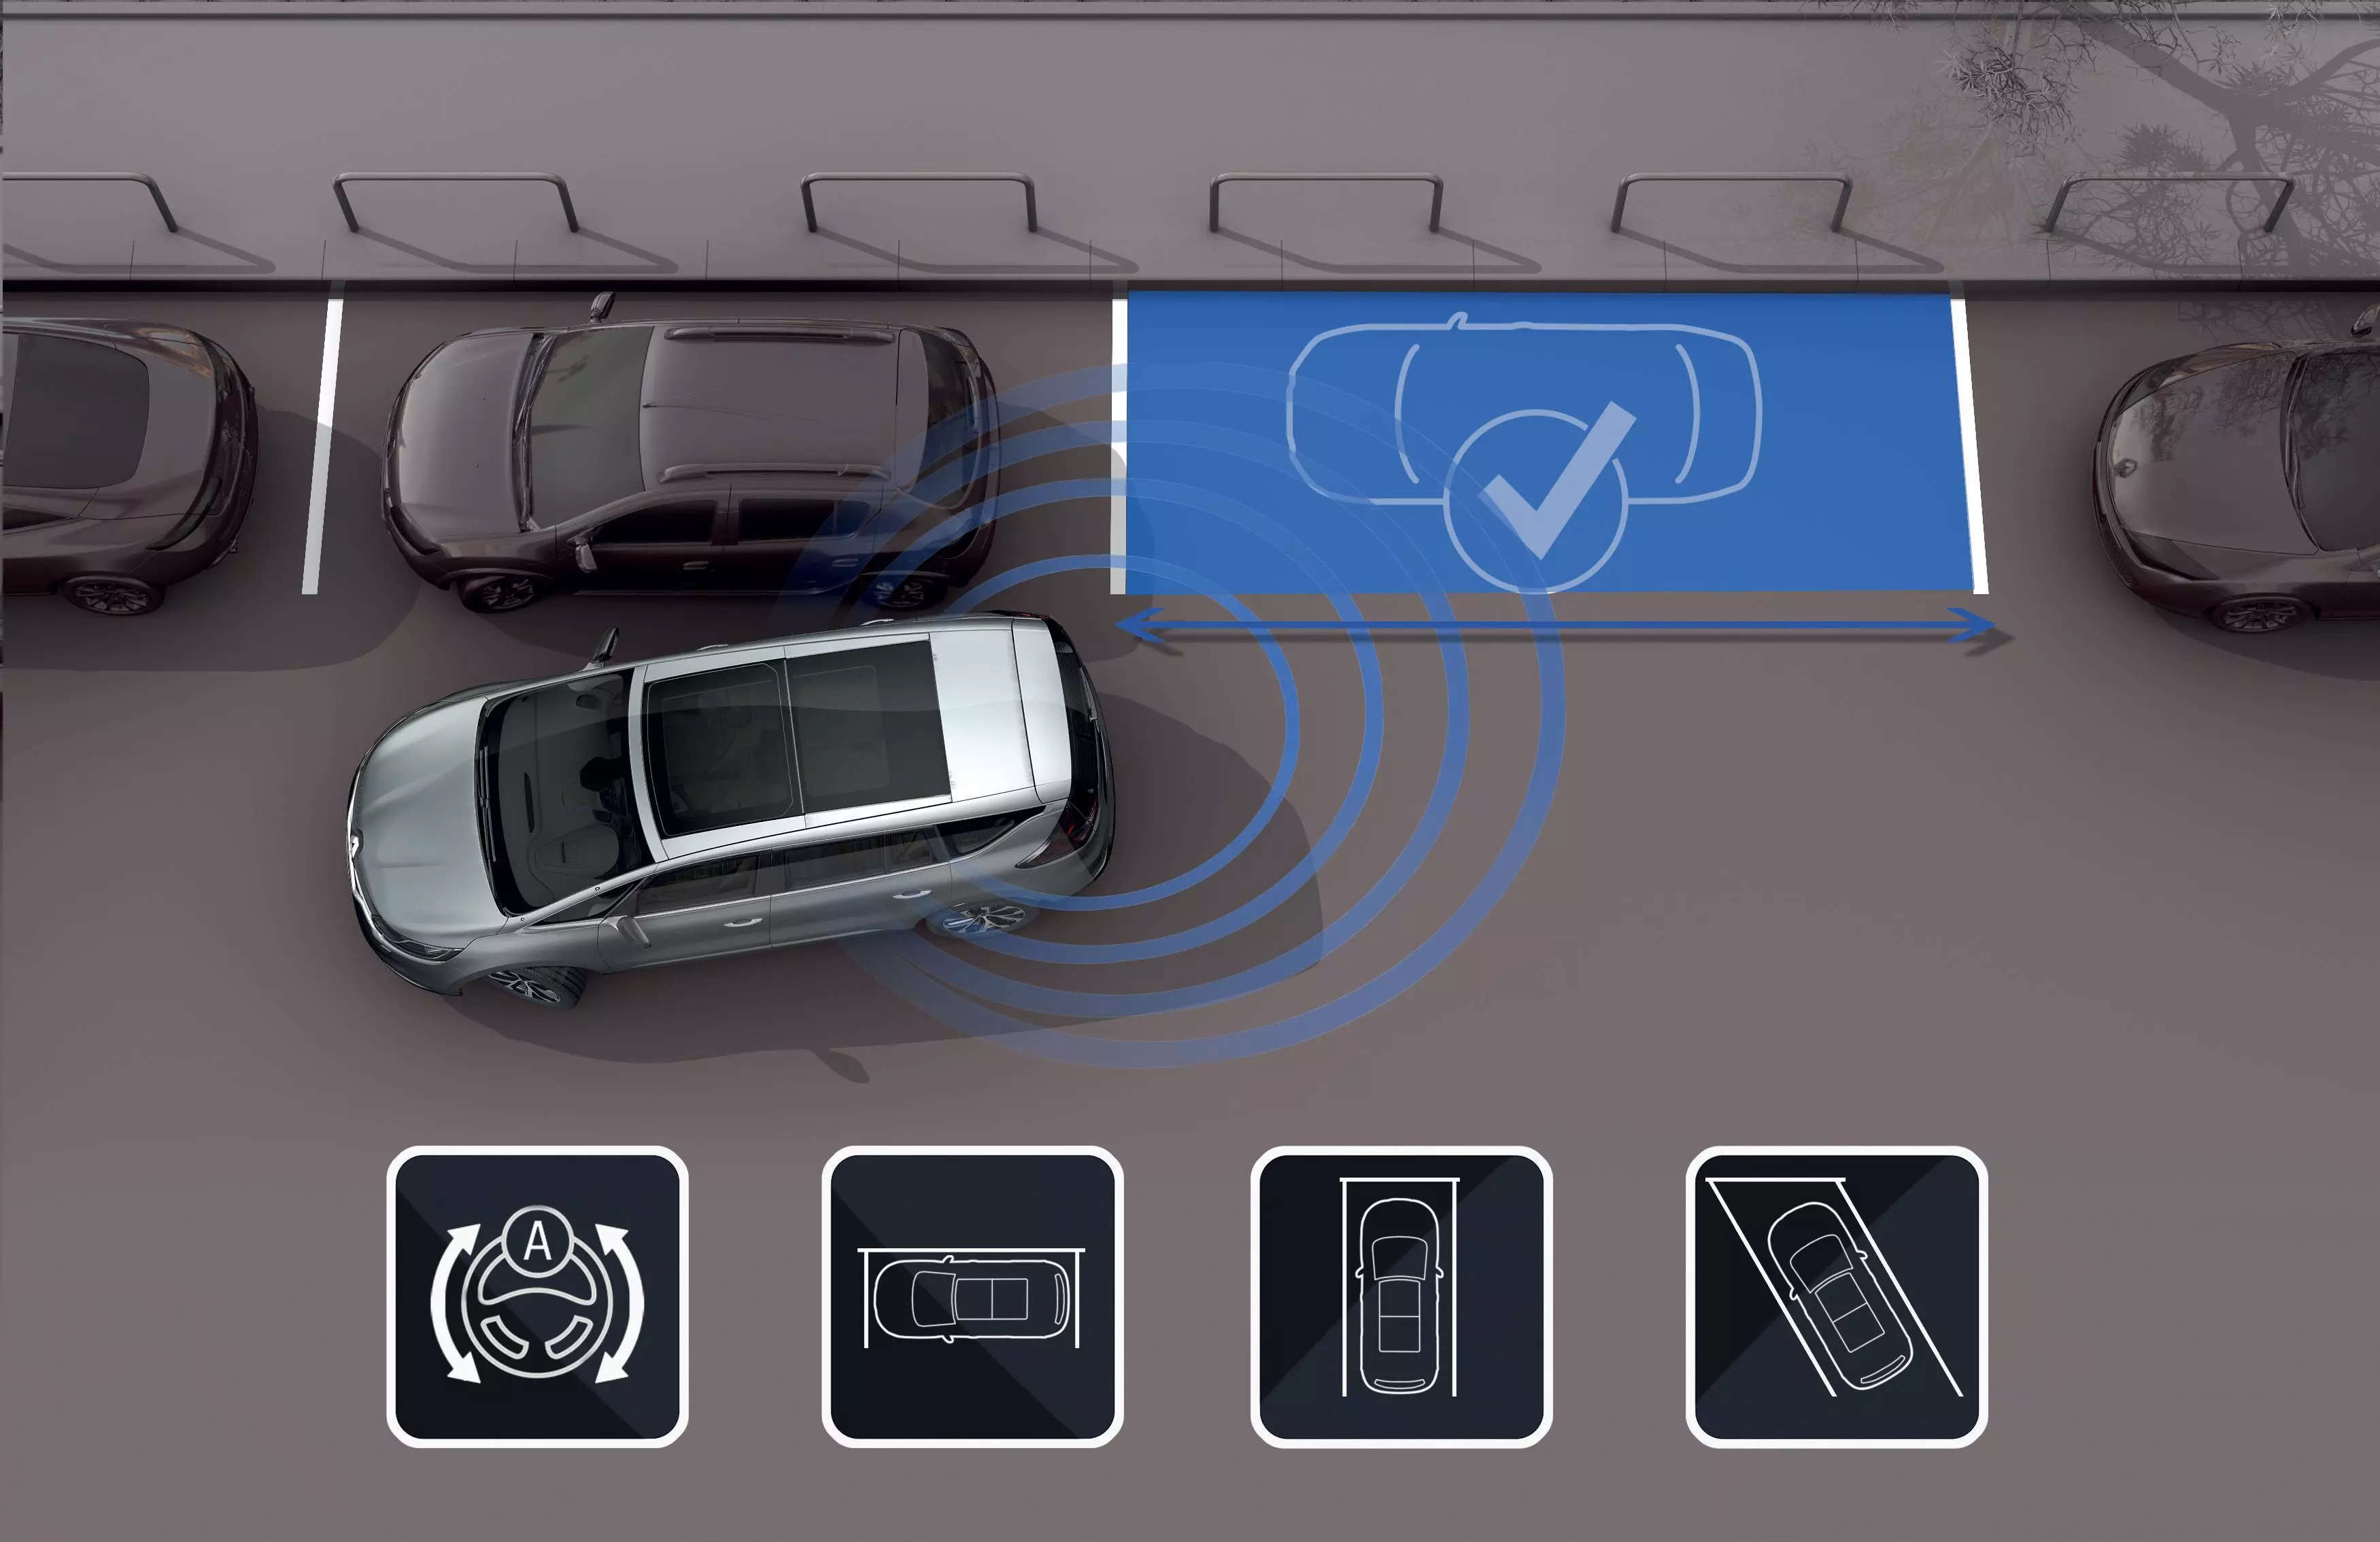  Renault's infotainment system &quot;OpenR Link&quot; is based on Android's operating system Android Automotive.